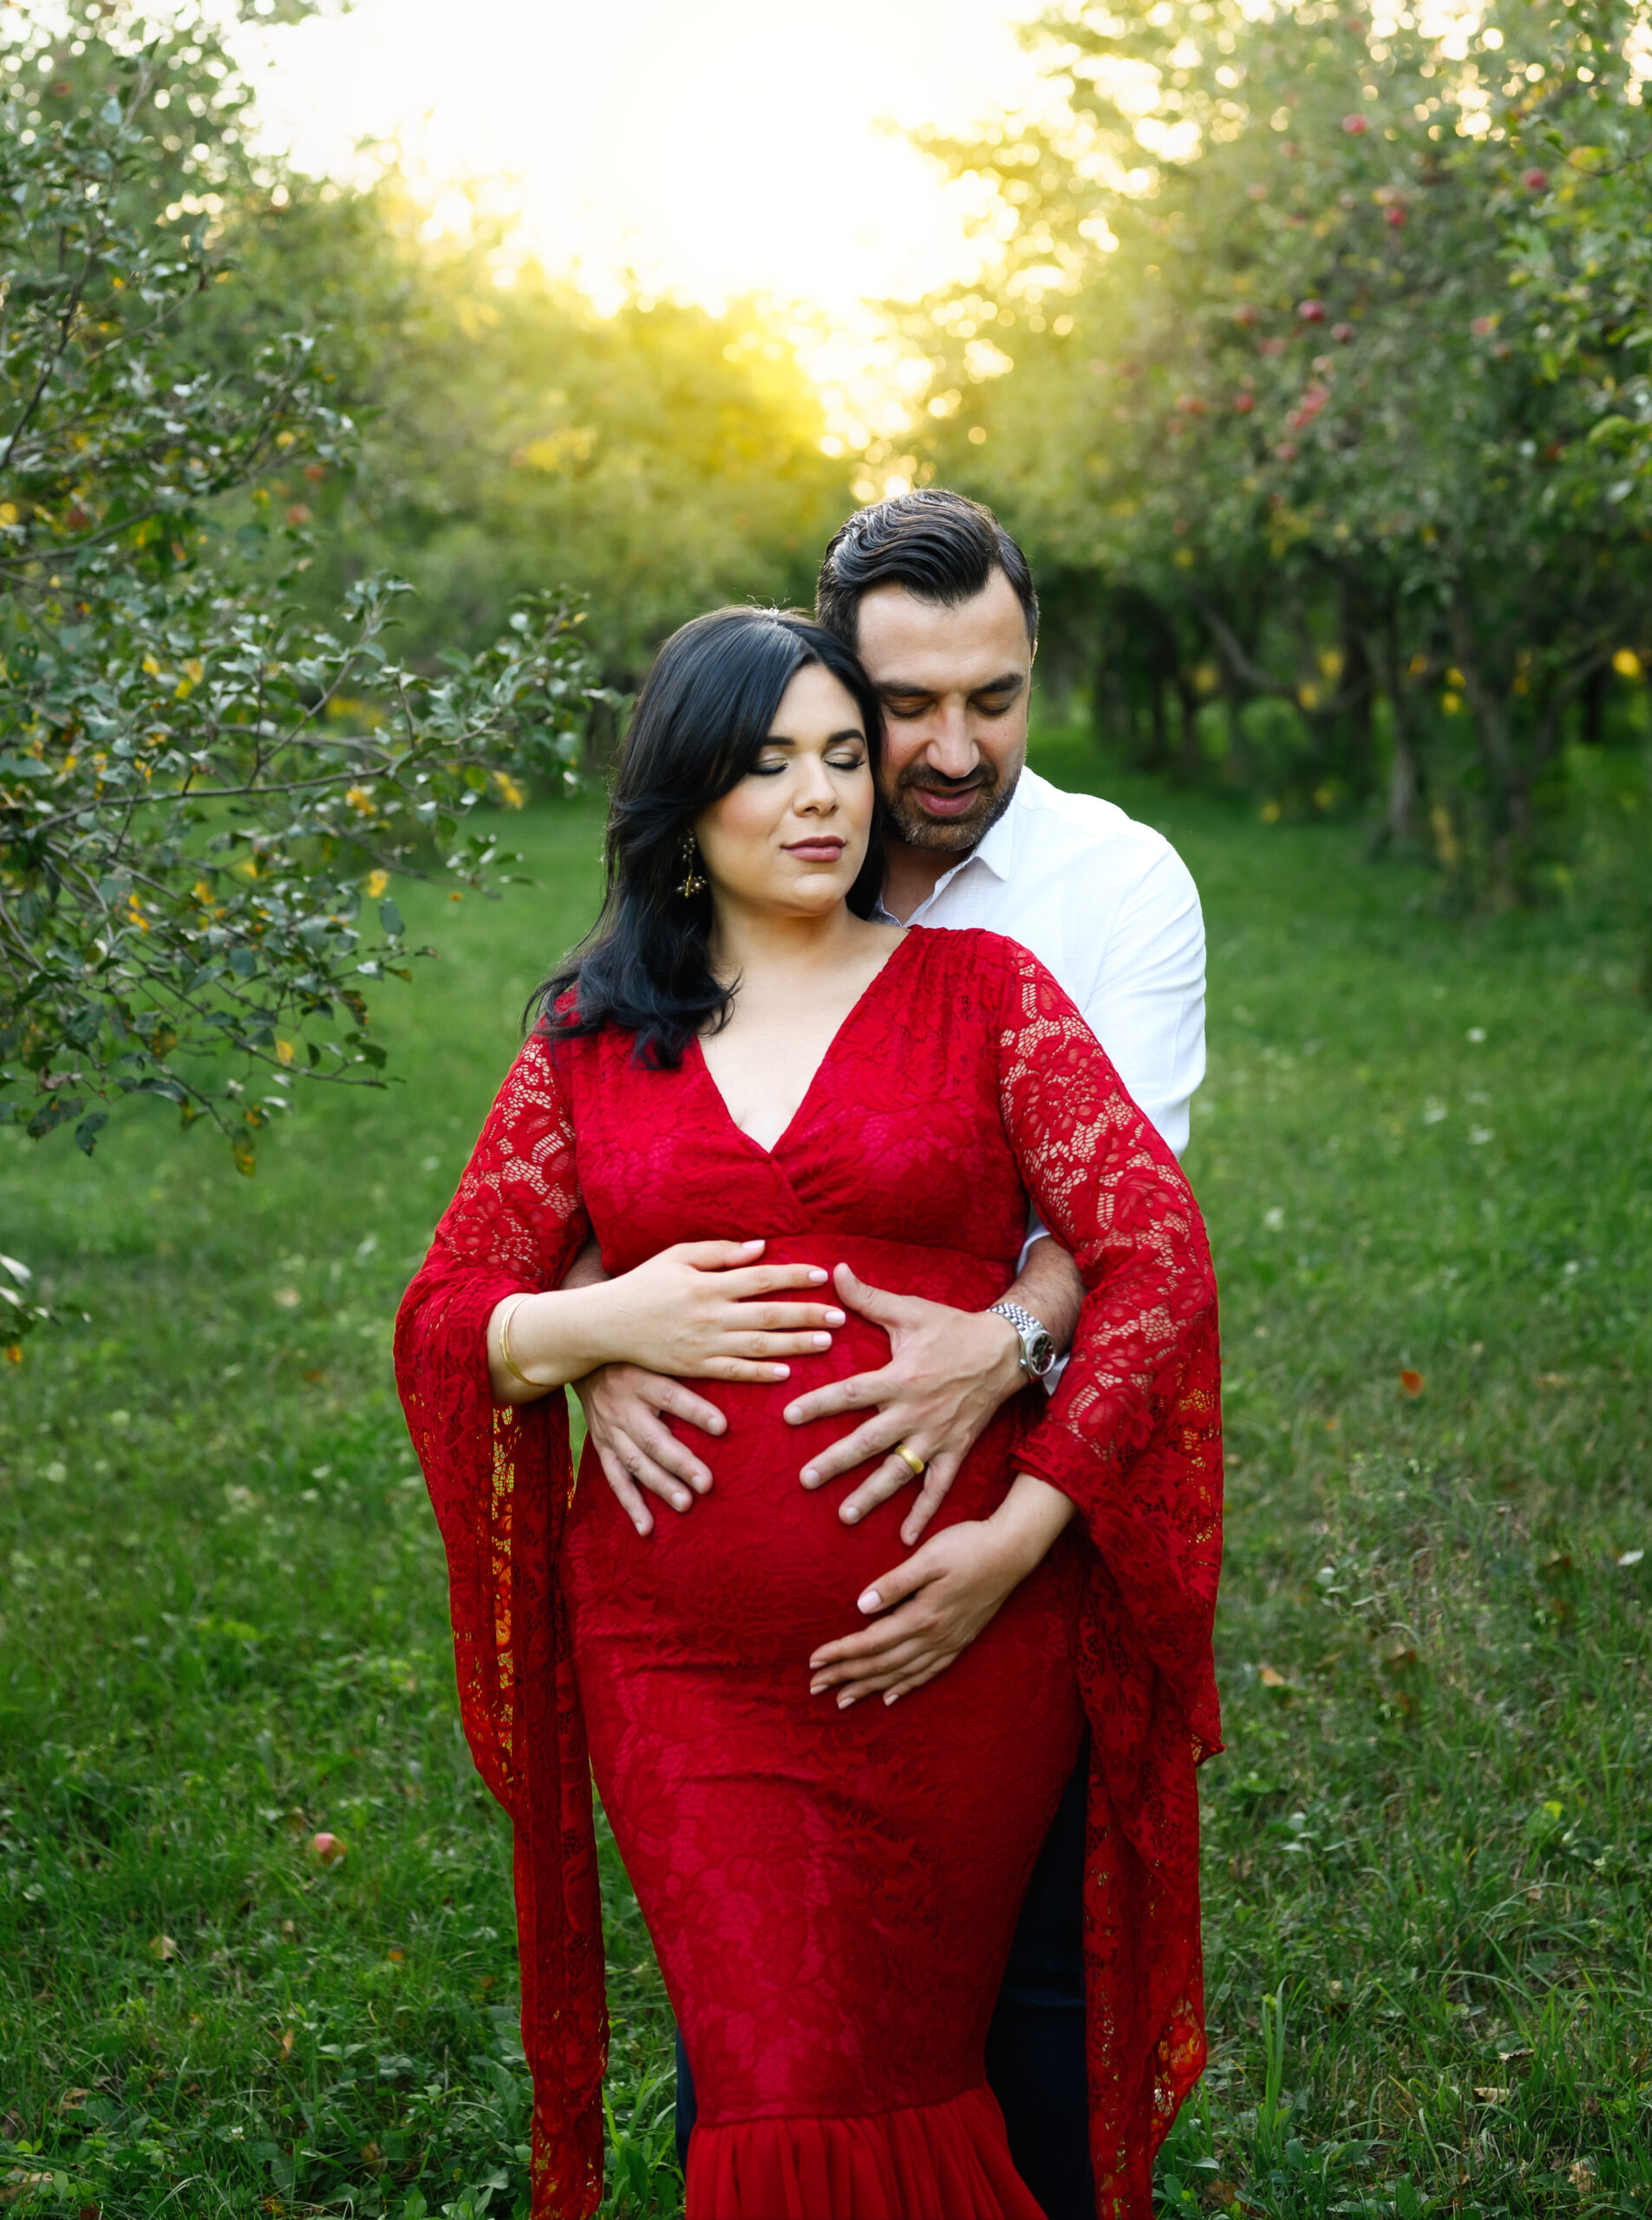 Grand rapids maternity photo session wife in red dress with husband in white shirt